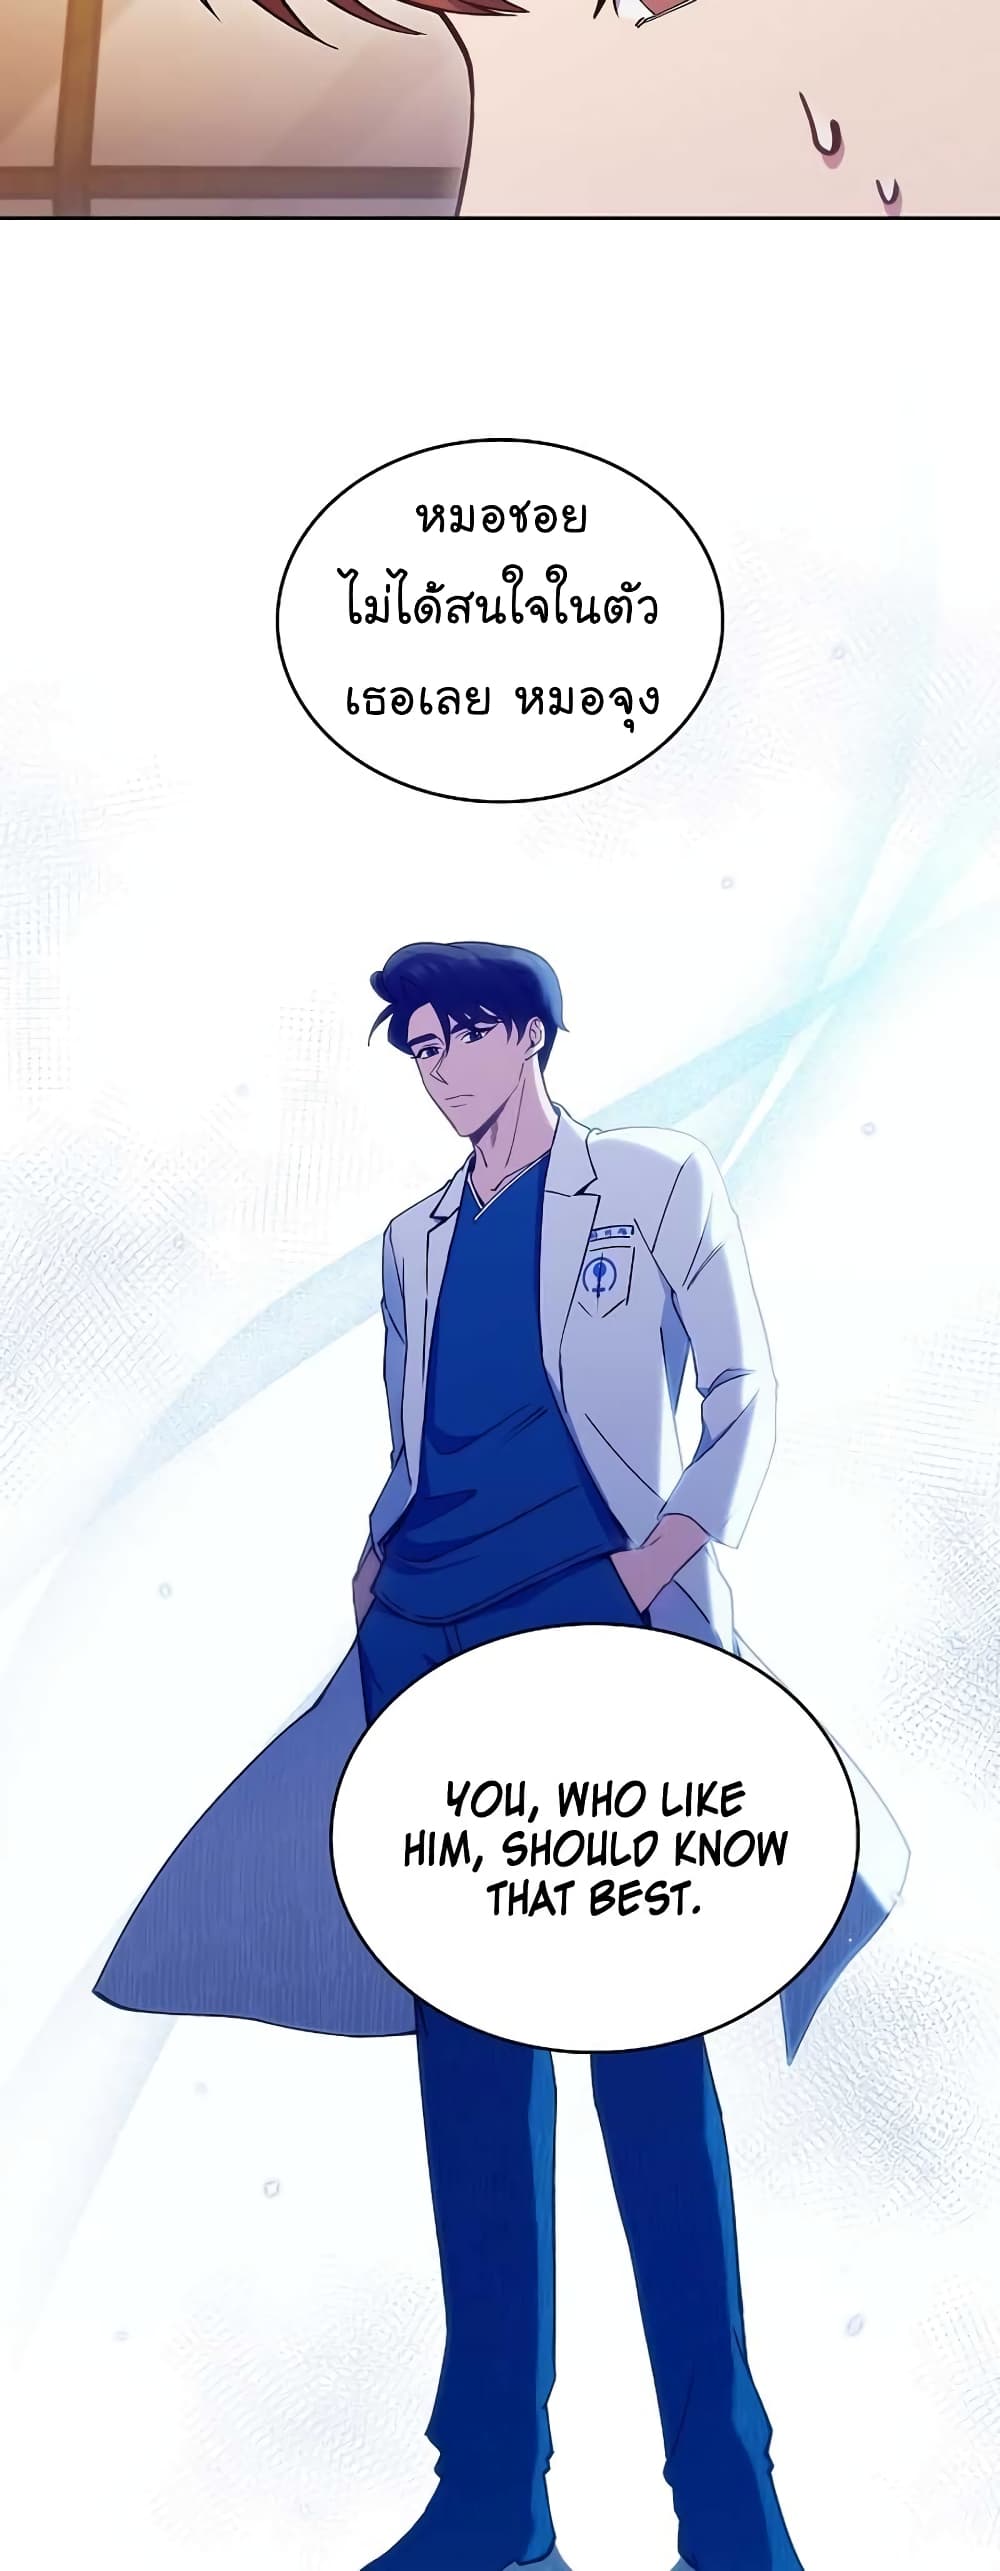 Level-Up Doctor 21-21